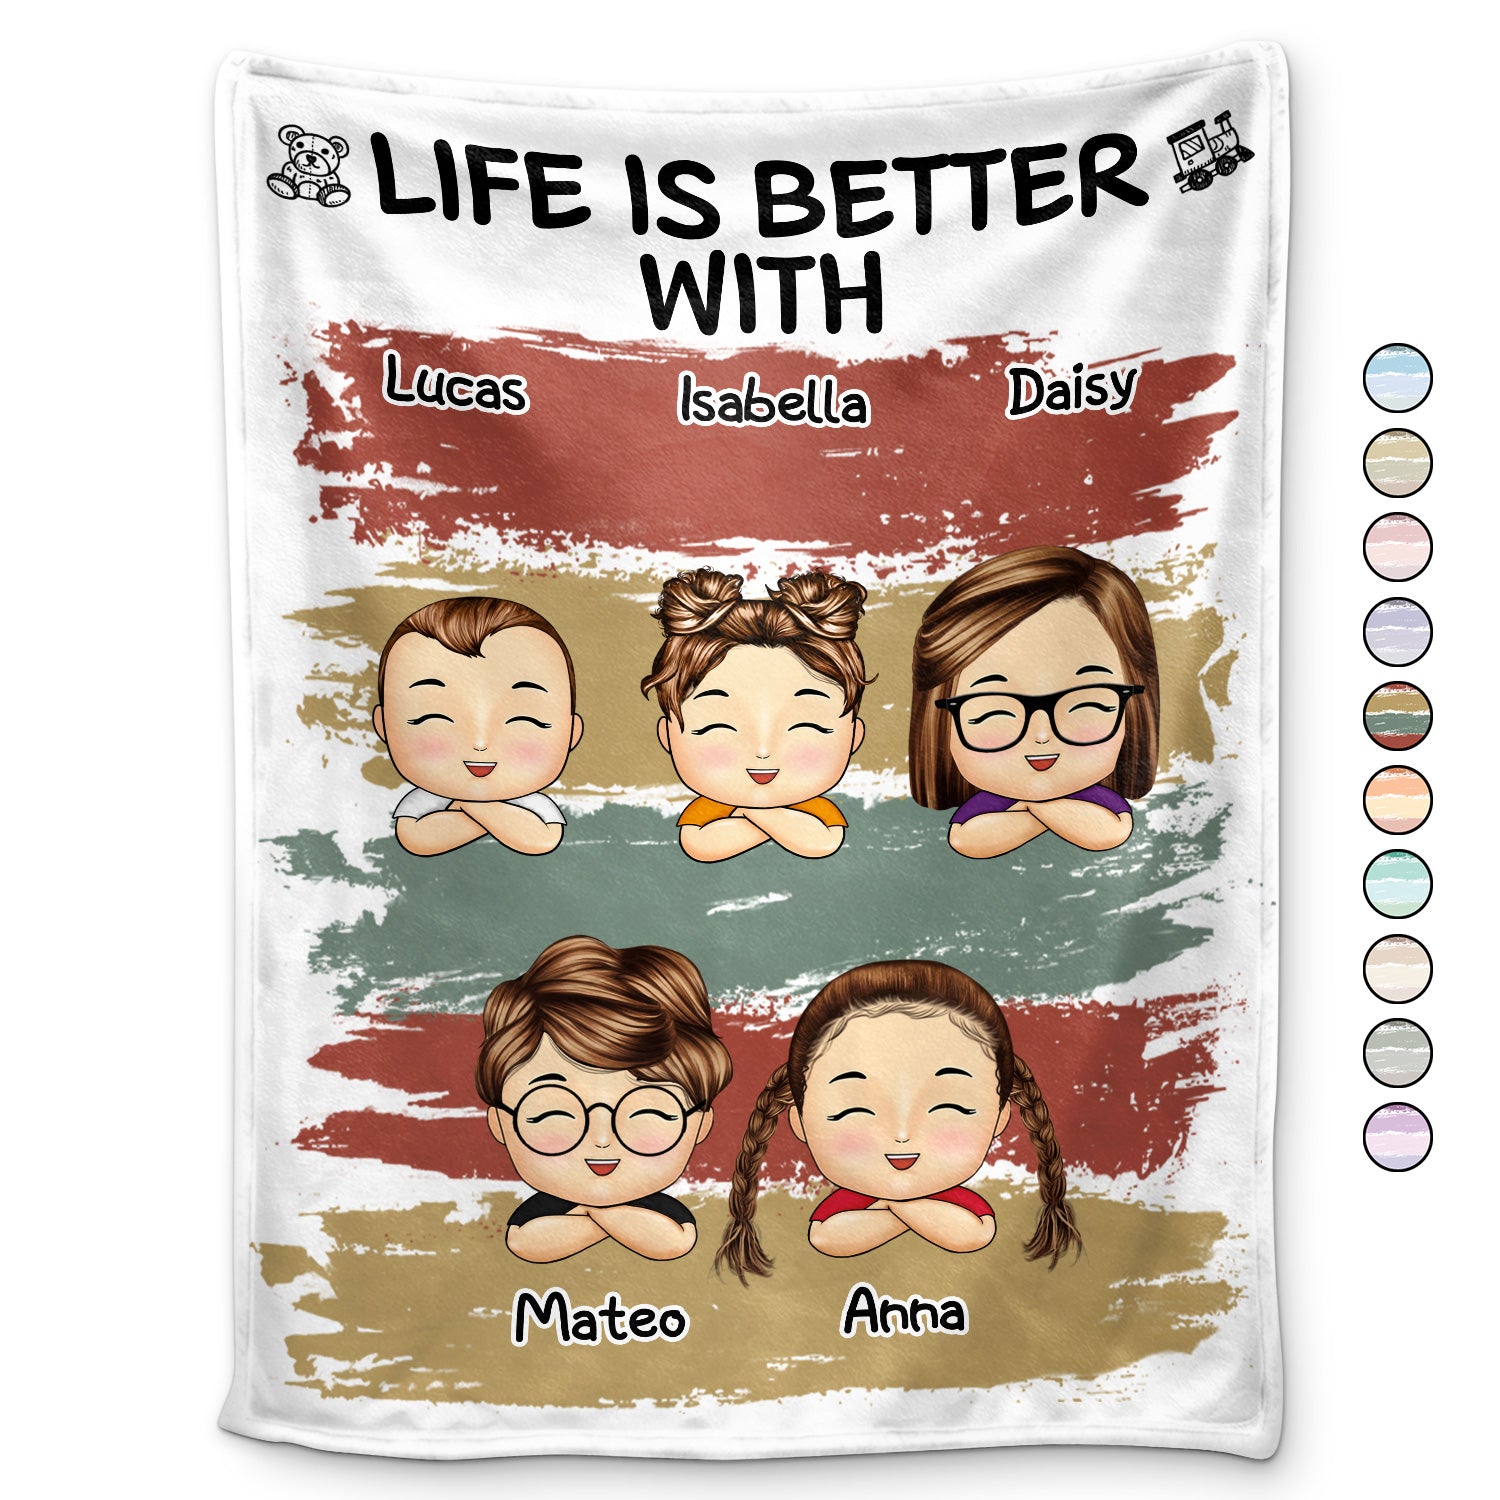 Life Is Better With Grandkids - Birthday, Loving Gift For Mother, Father, Grandma, Grandpa - Personalized Fleece Blanket, Sherpa Blanket